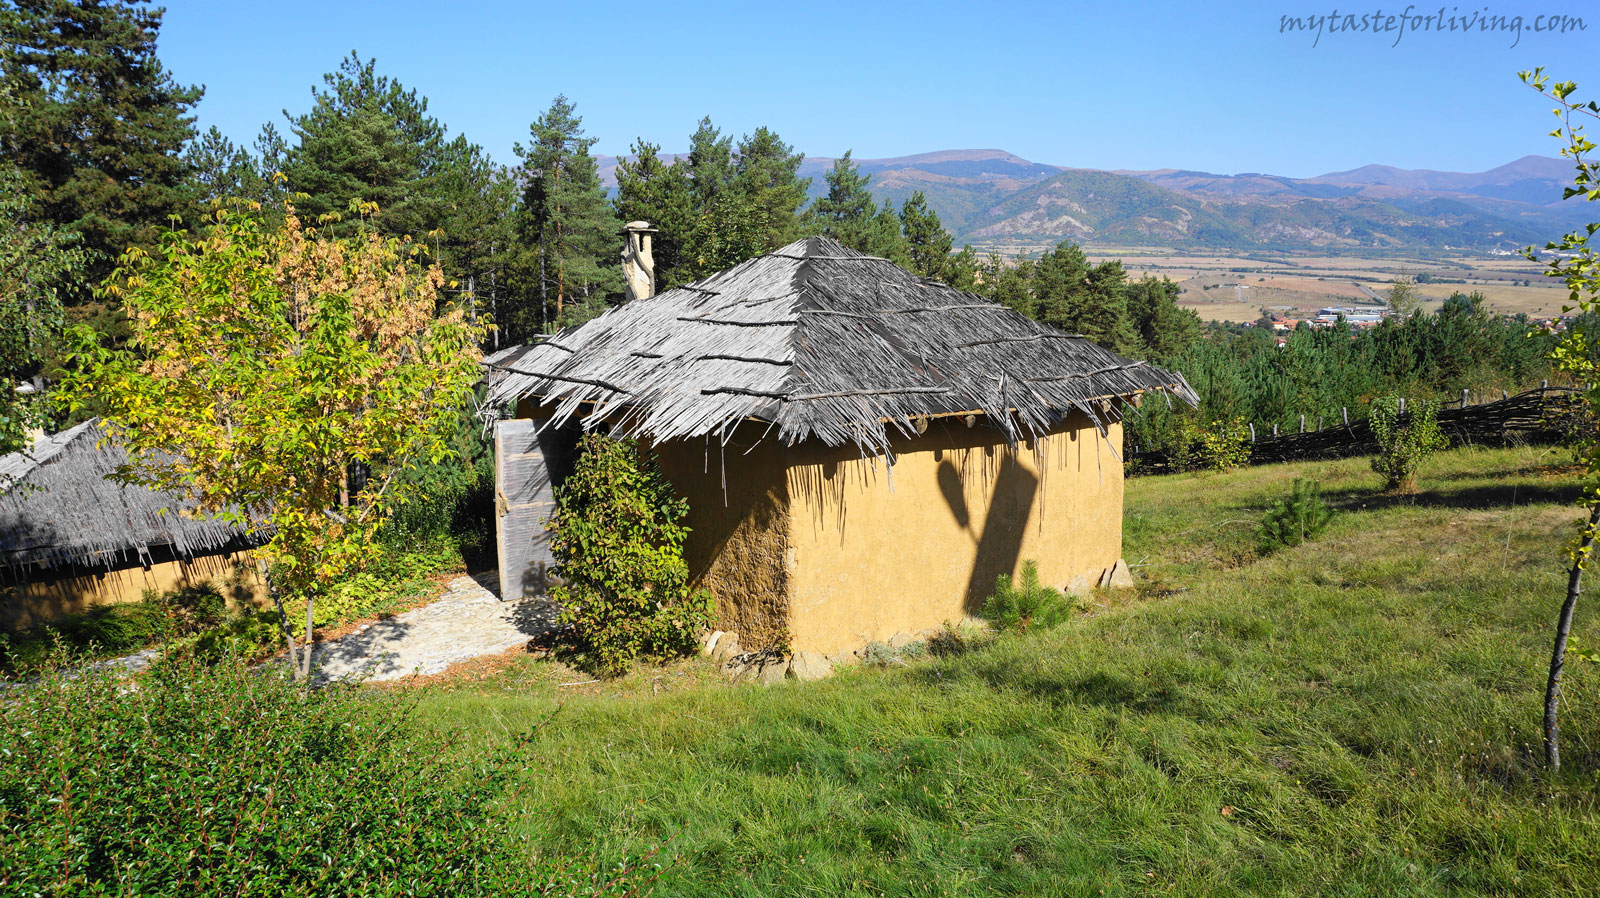 The archaeological park "Topolnitsa" and the Chapel "St. Petka "is located on the territory of the village of Chavdar, Sofia region, Bulgaria. 